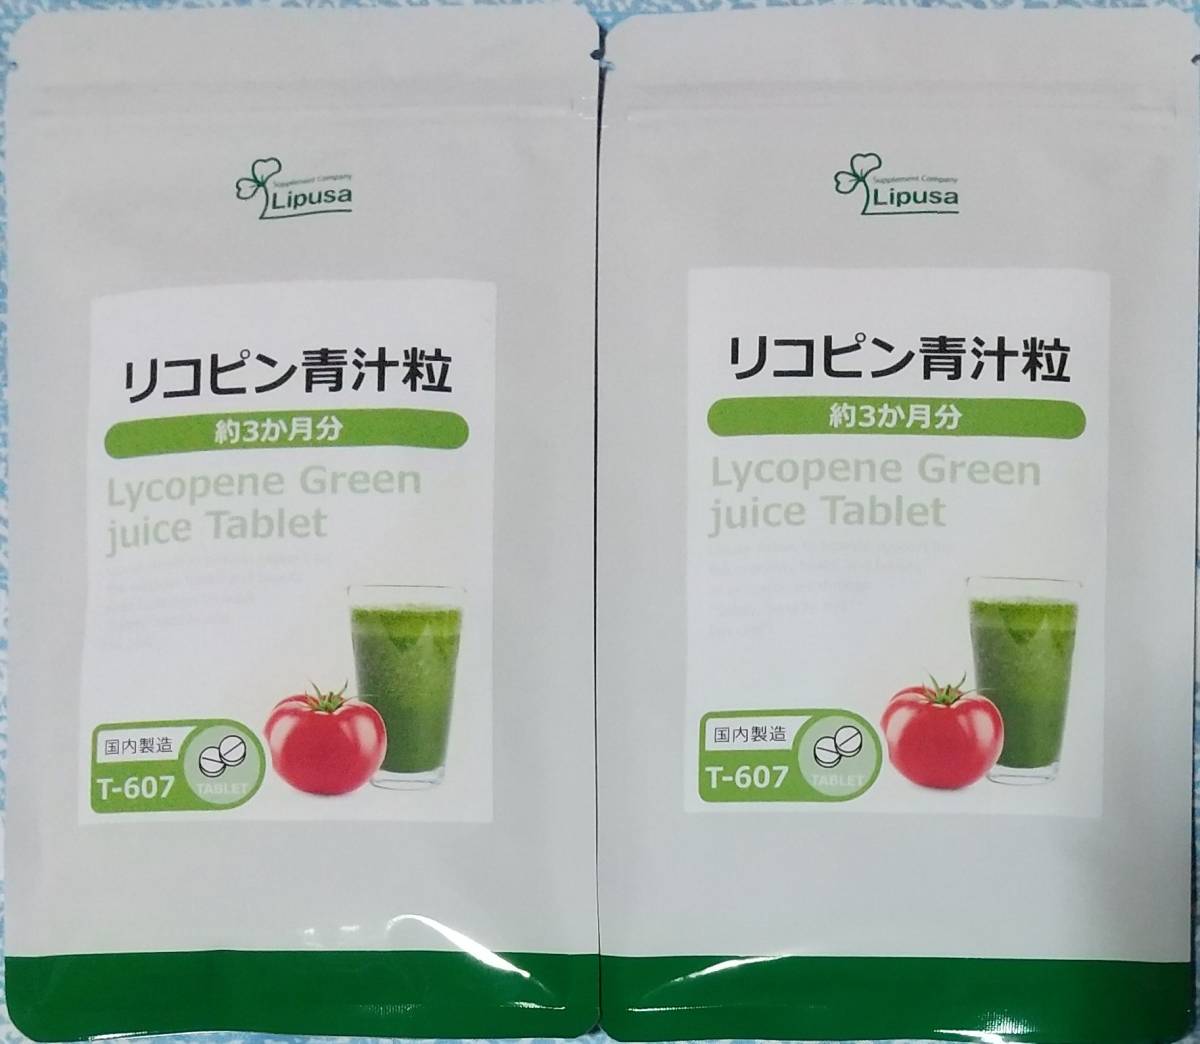 [ half-price super OFF]lipsa Rico pin green juice bead approximately 6 months minute * free shipping ( pursuit possibility ) barley . leaf Rico pin tomato supplement 